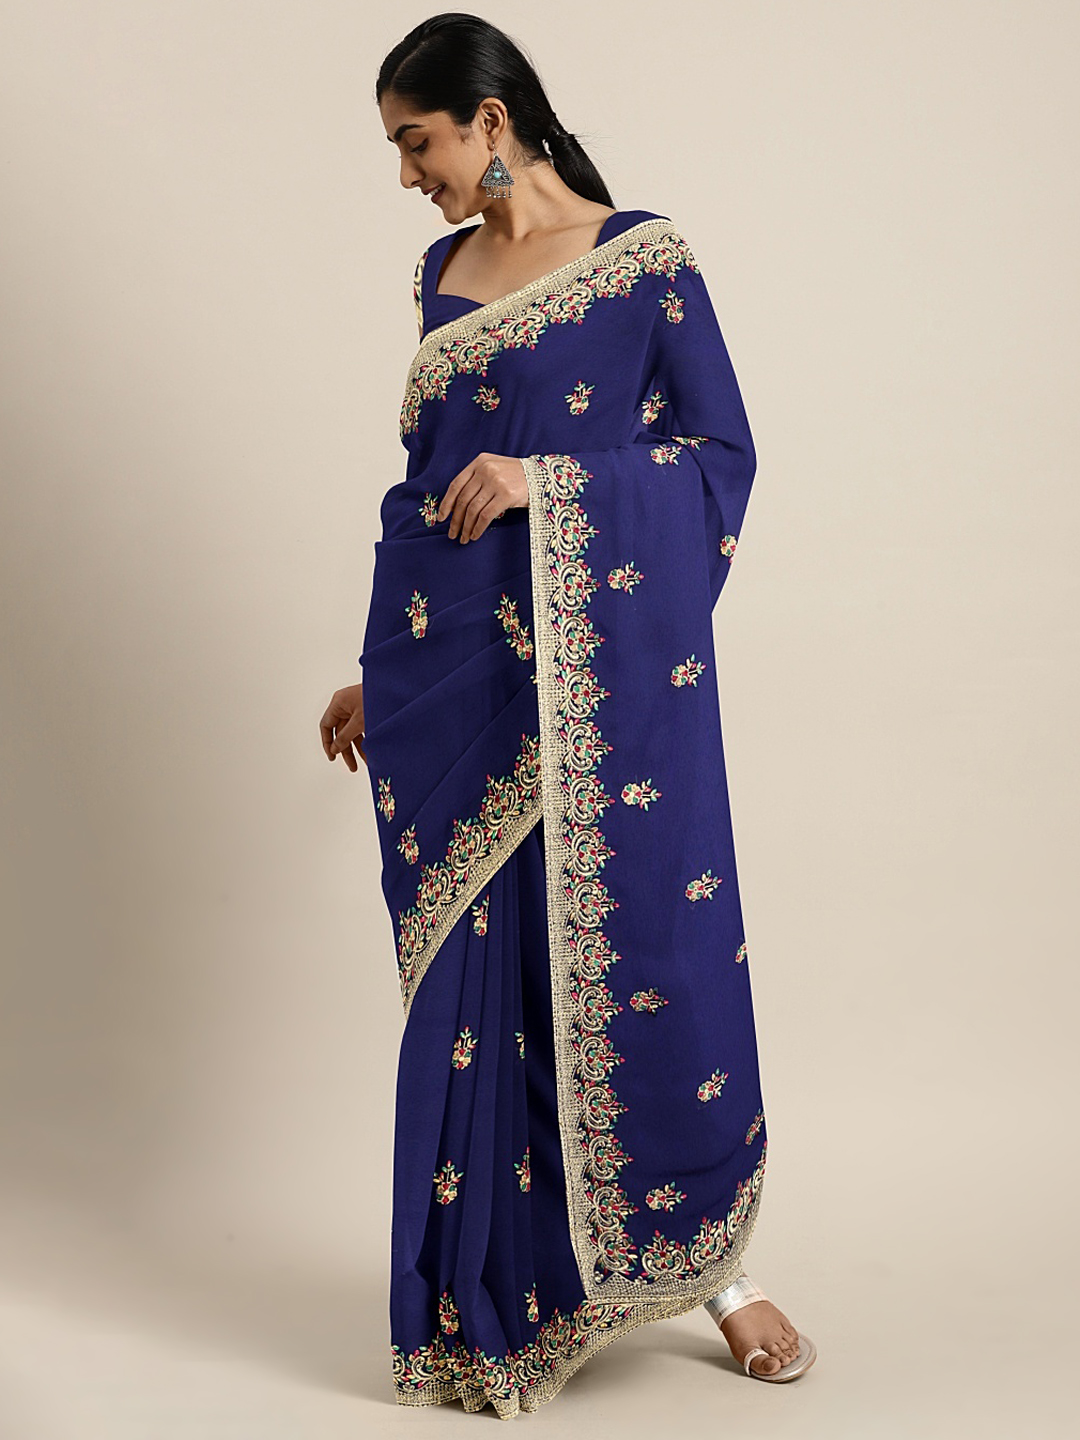 Soch Navy Blue Embroidered Poly Georgette Saree Price in India